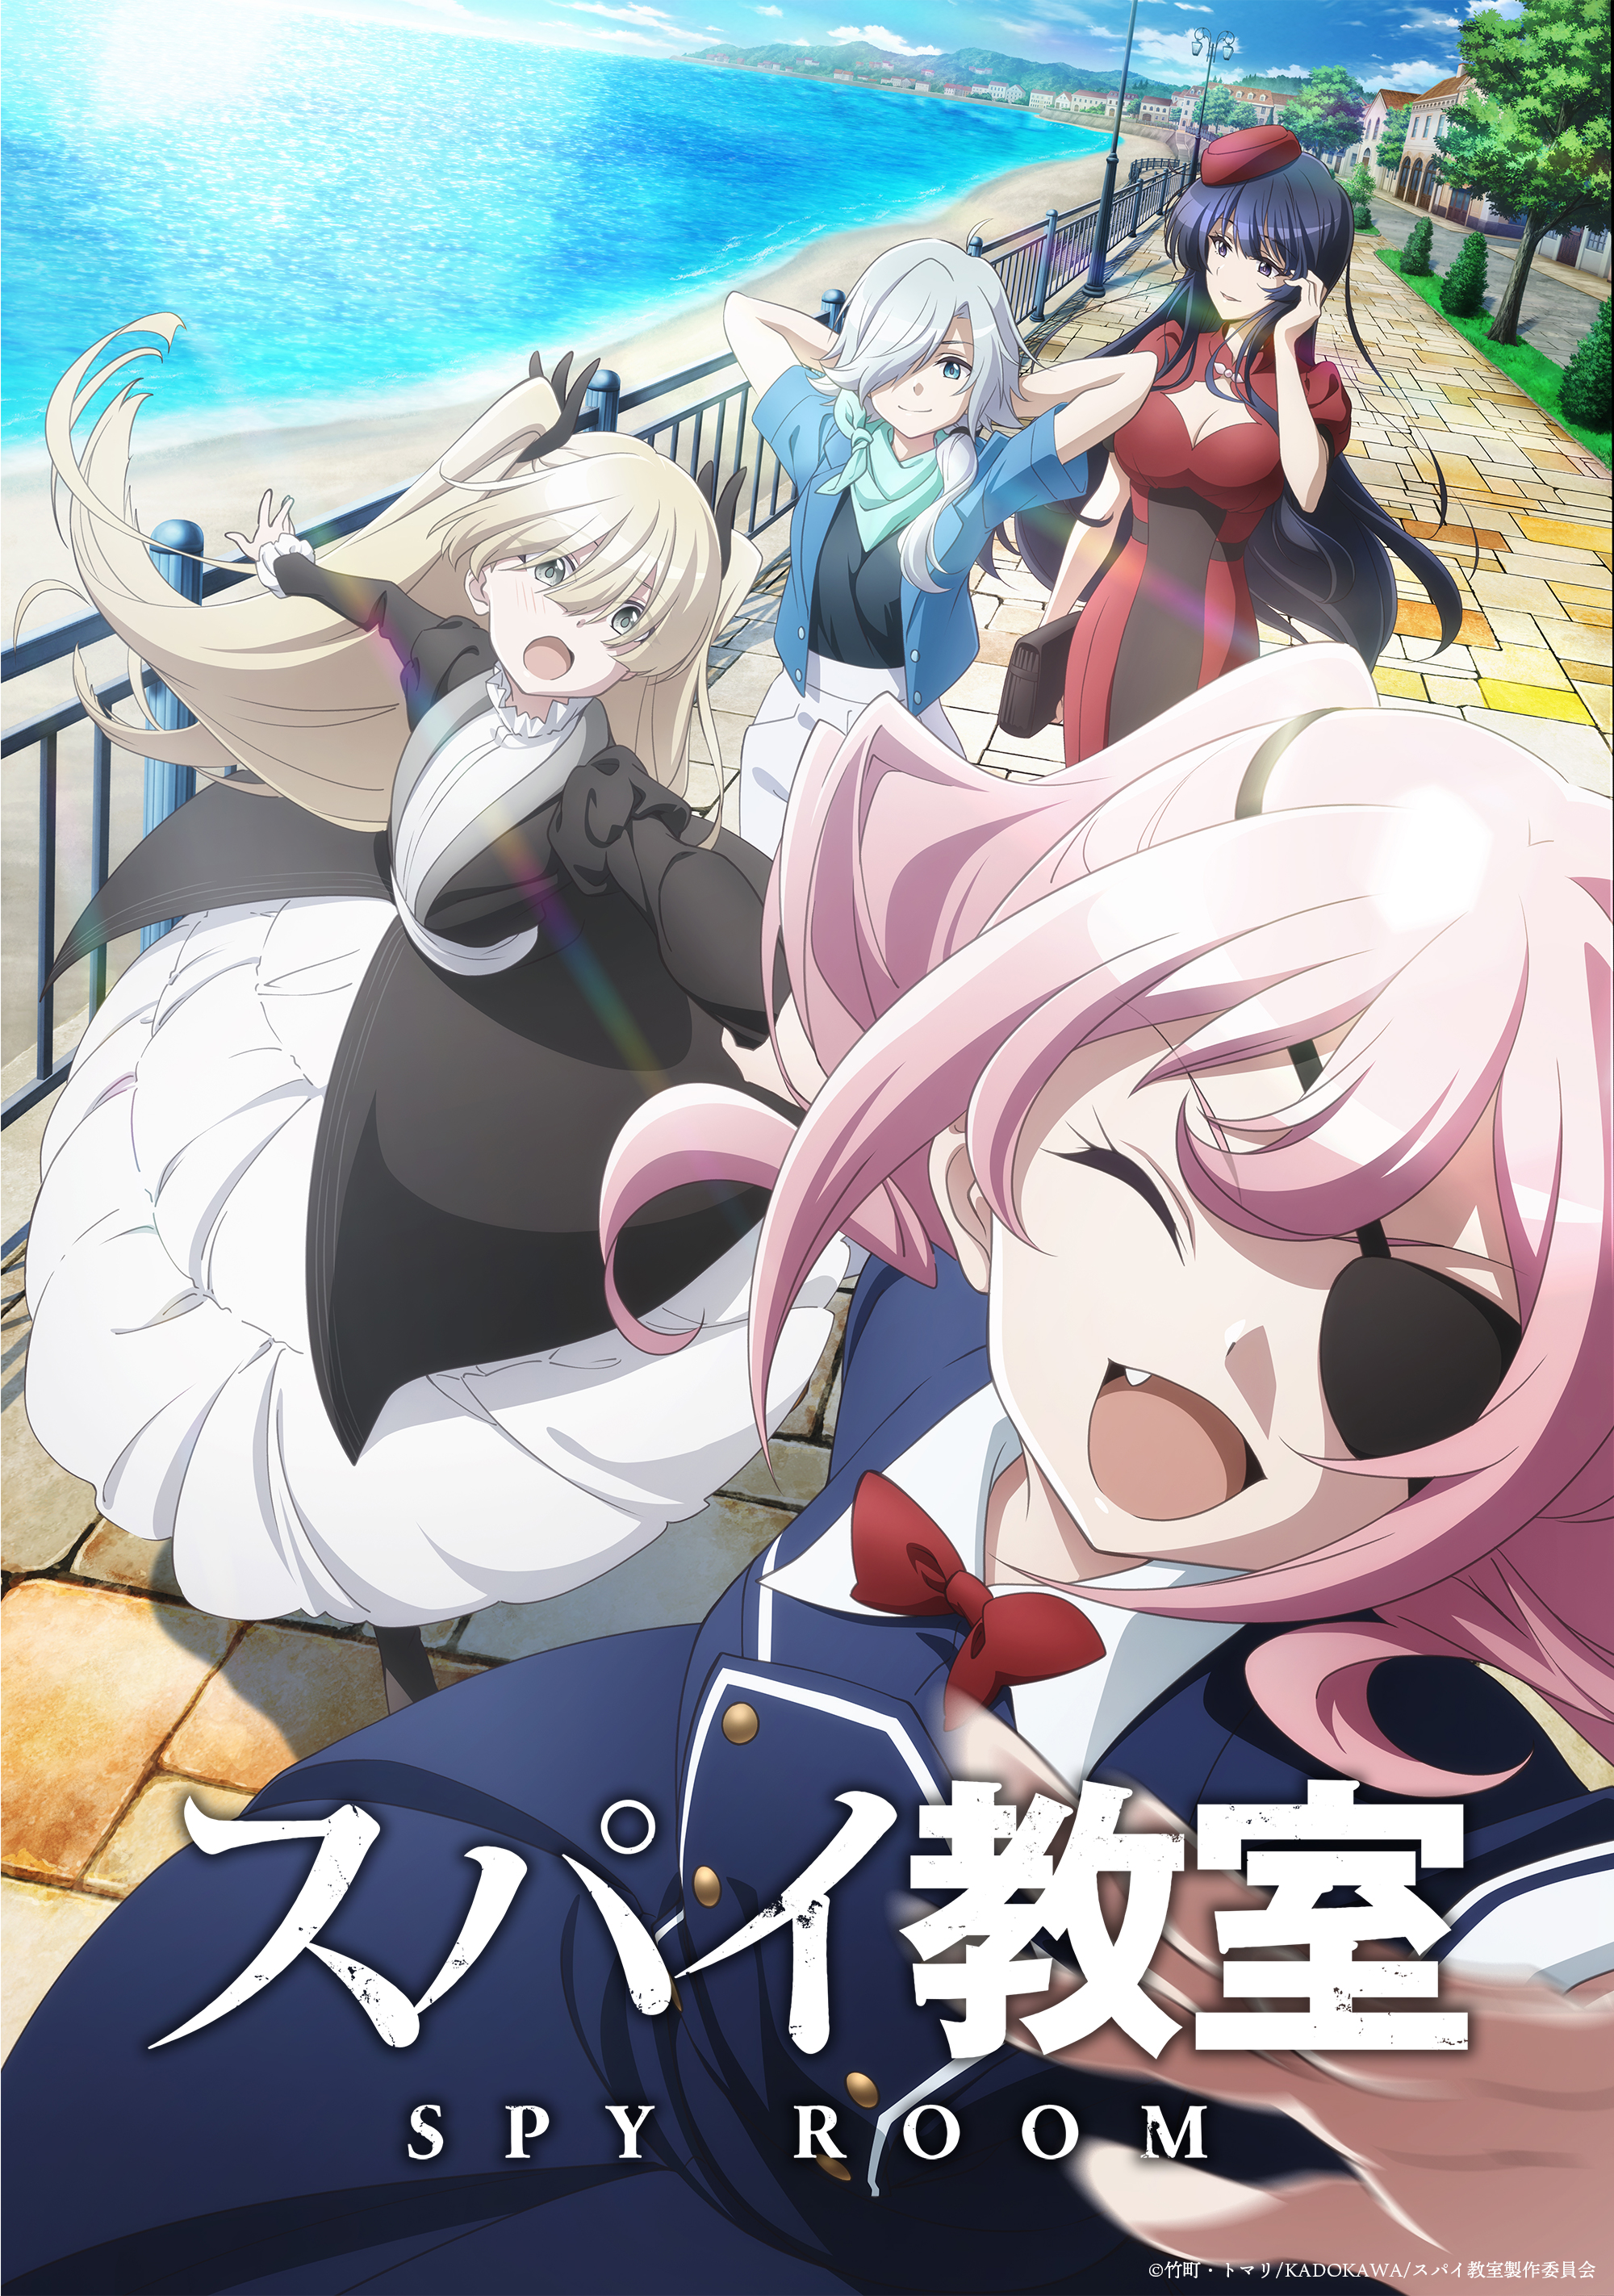 Anime Corner News - JUST IN: Season 2 of Classroom of the Elite is coming  this July, while Season 3 is set for 2023 release! New trailer:   The entirety of Year